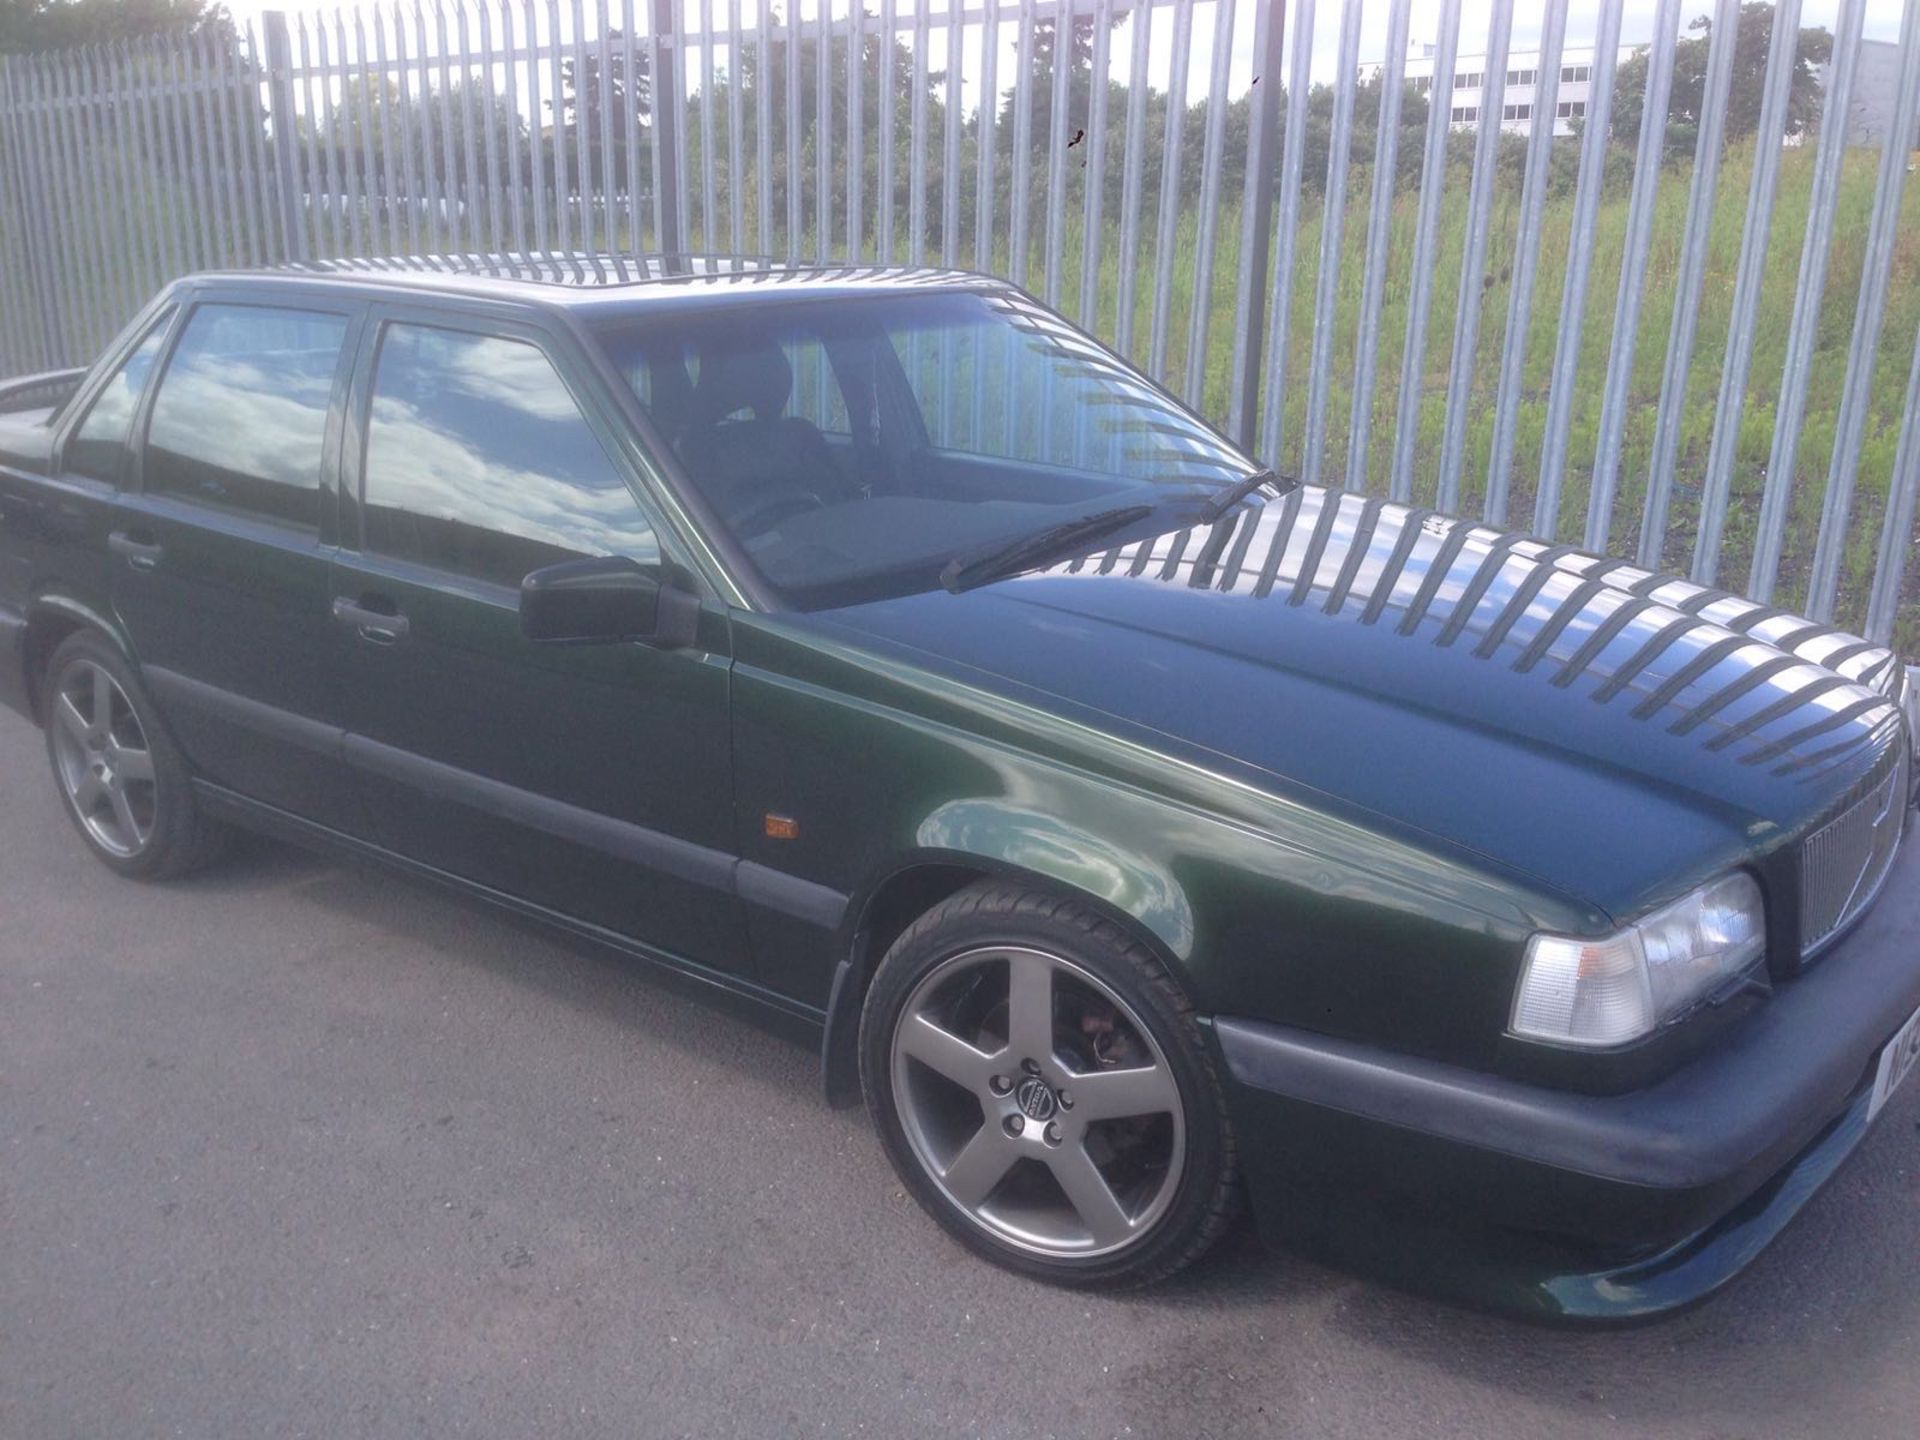 VOLVO T5-R saloon auto, 1995/N. olive green, - Image 8 of 18